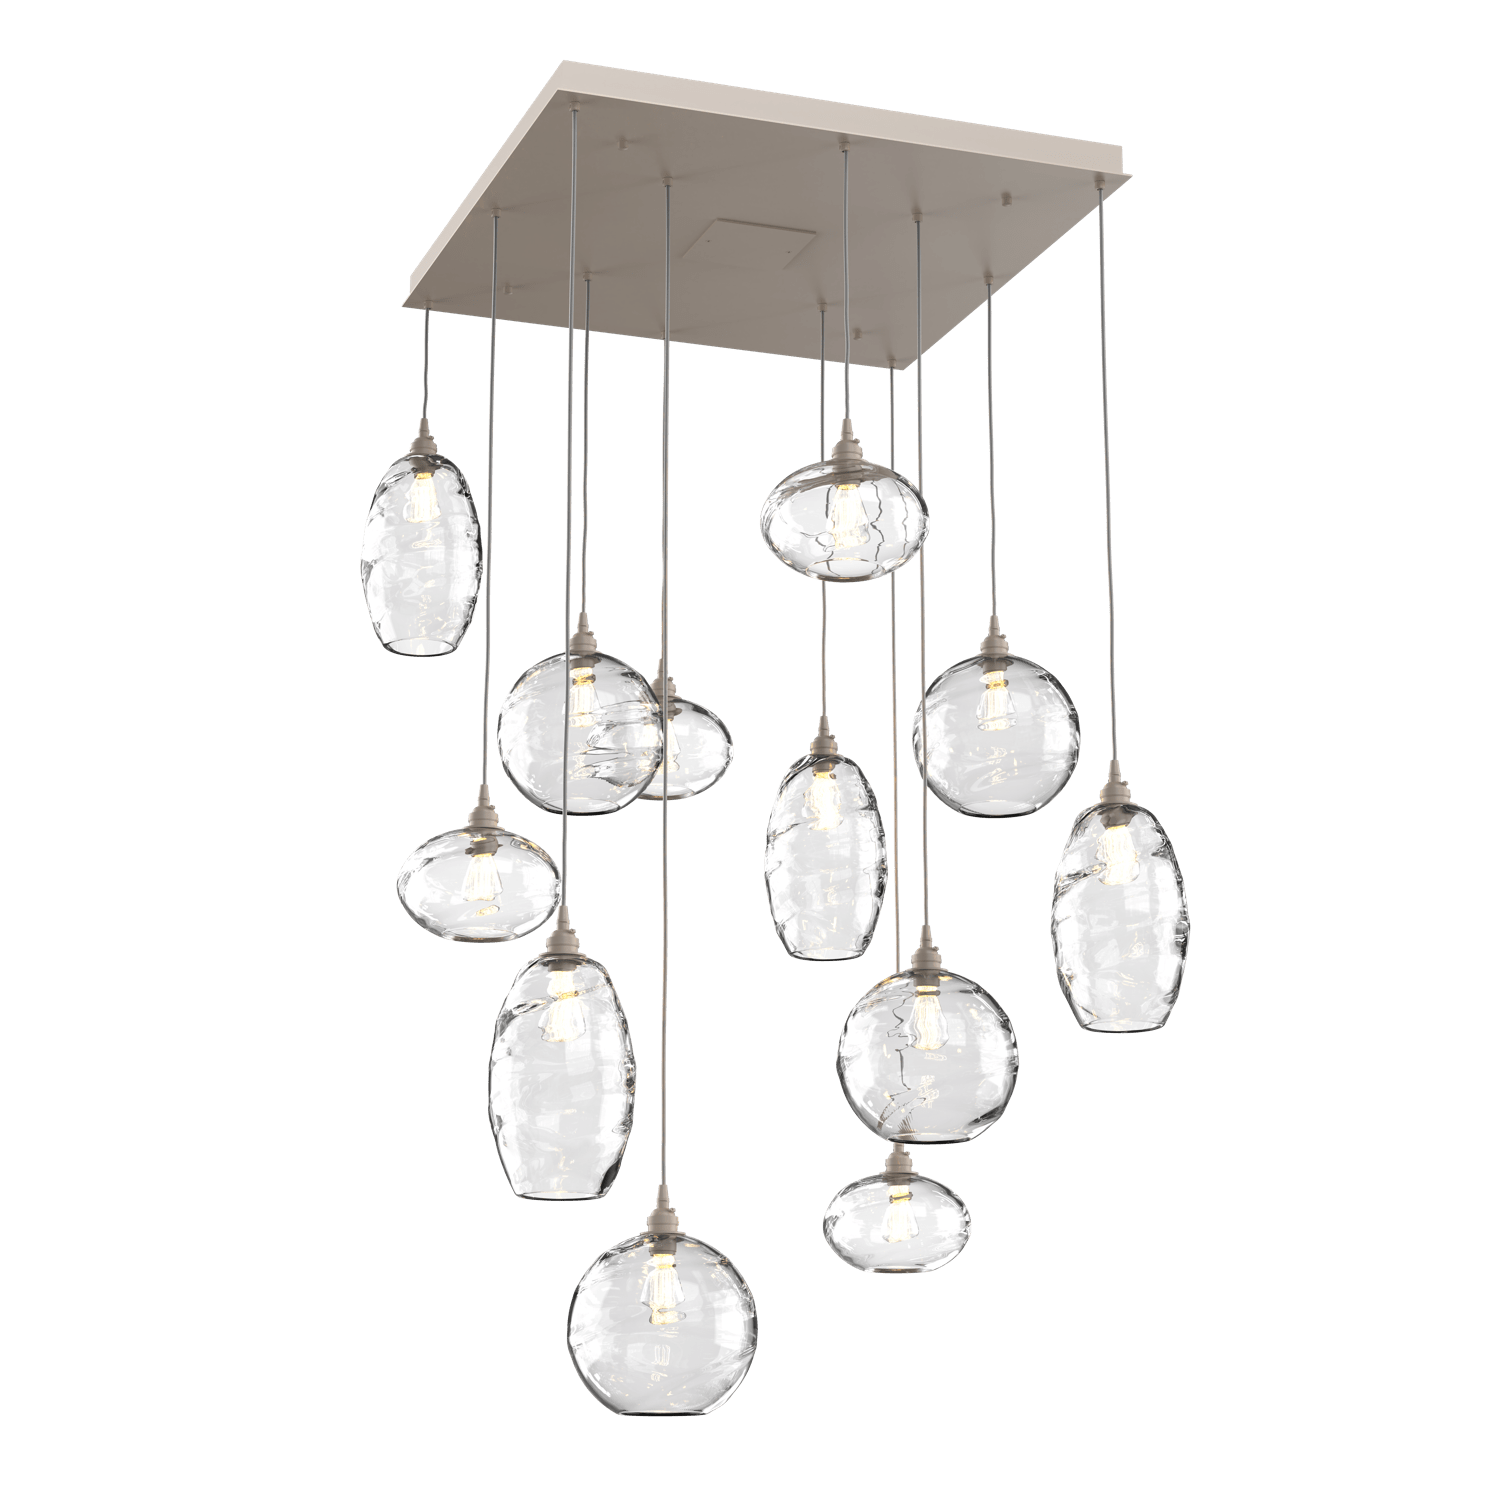 CHB0048-12-BS-OC-Hammerton-Studio-Optic-Blown-Glass-Misto-12-light-square-pendant-chandelier-with-metallic-beige-silver-finish-and-optic-clear-blown-glass-shades-and-incandescent-lamping